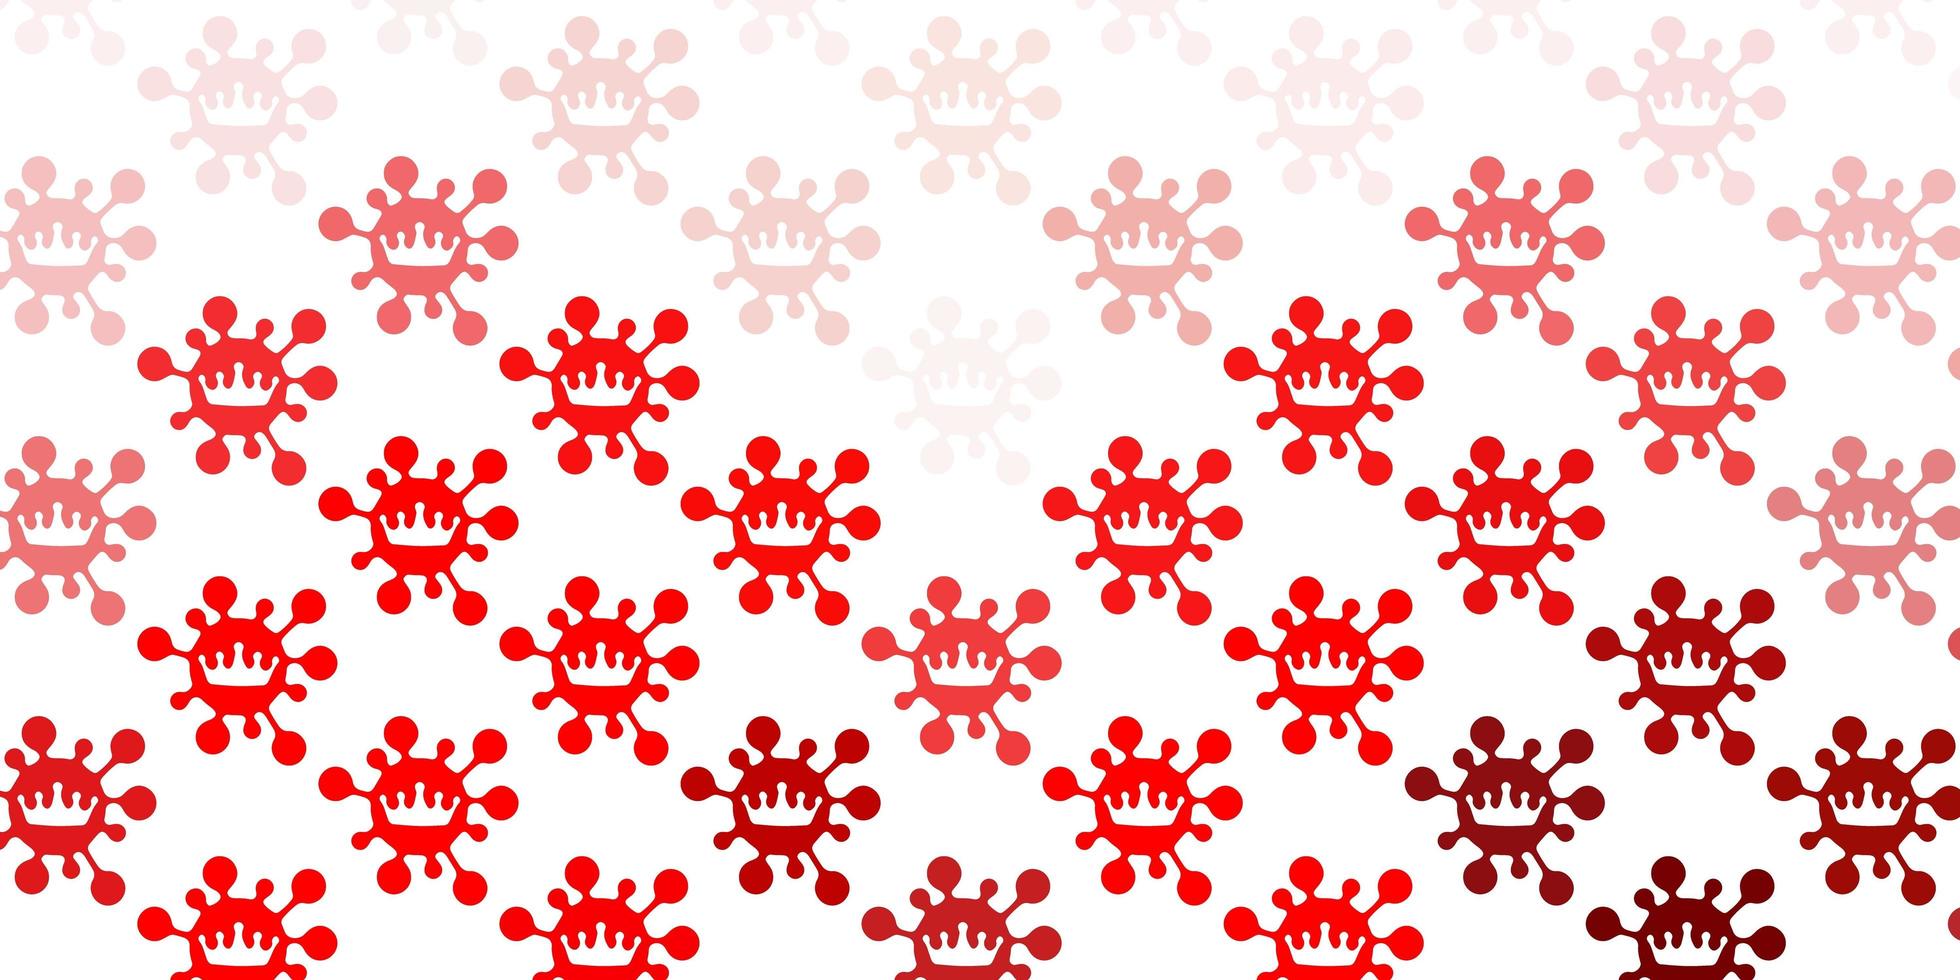 Light red backdrop with virus symbols. vector